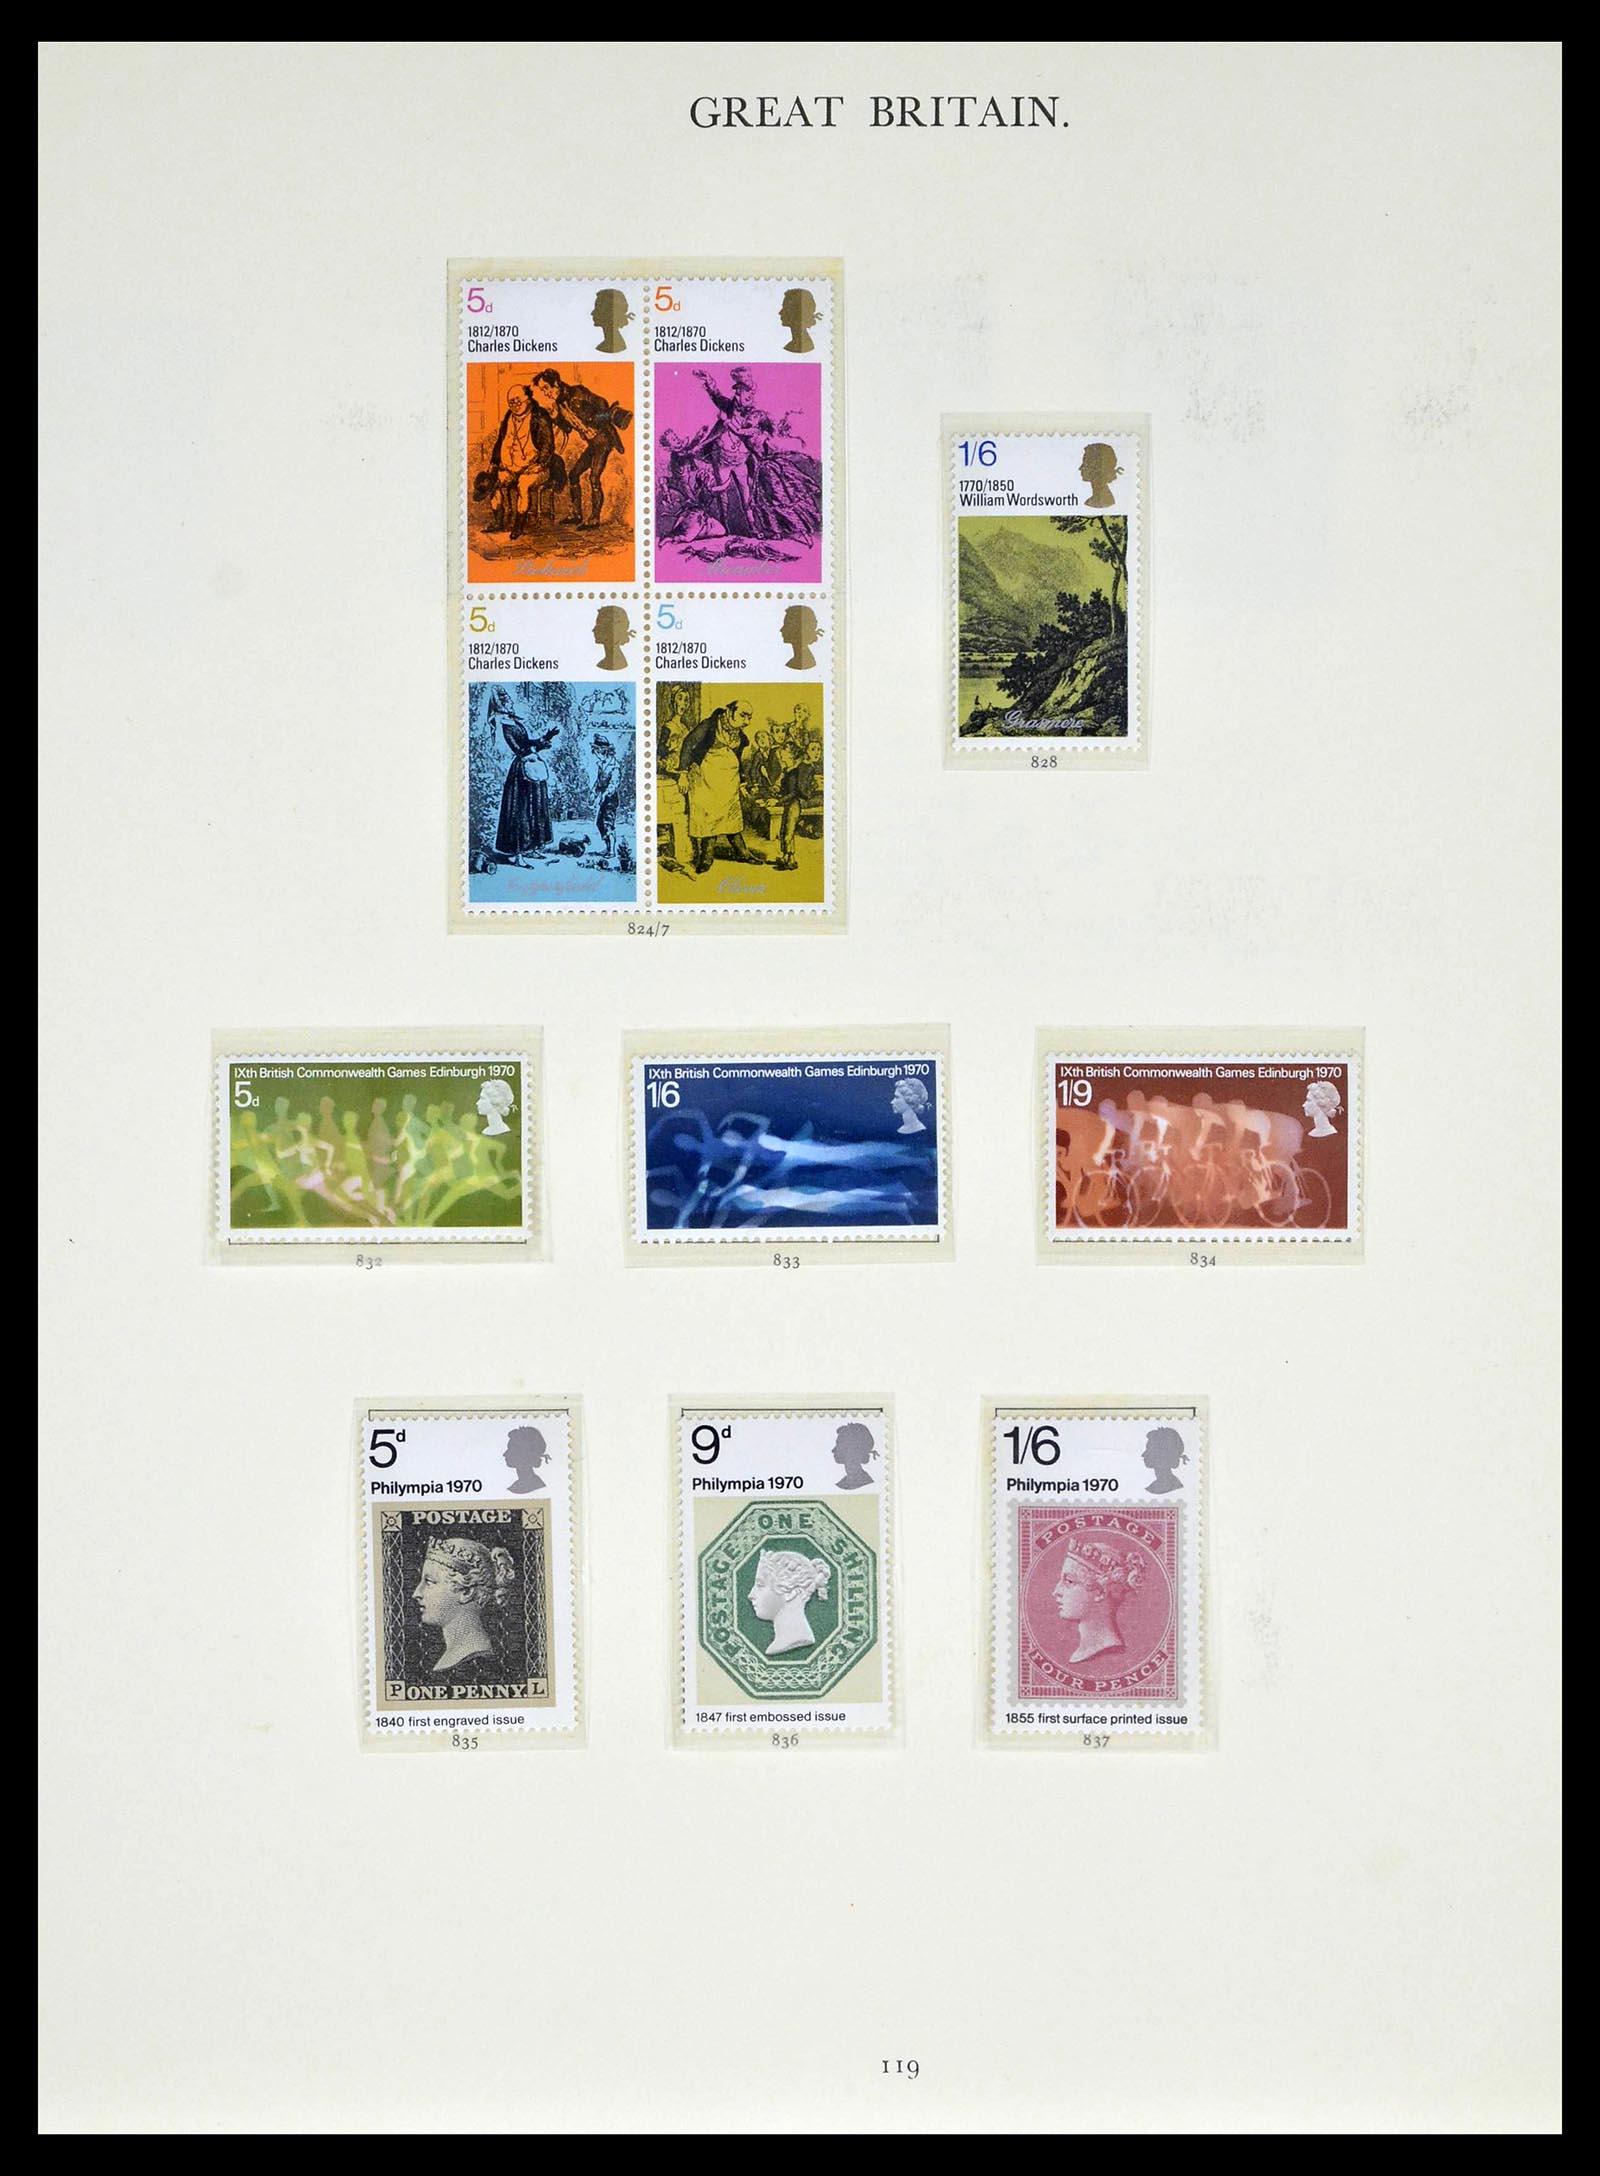 39025 0058 - Stamp collection 39025 Great Britain specialised 1840-1990.